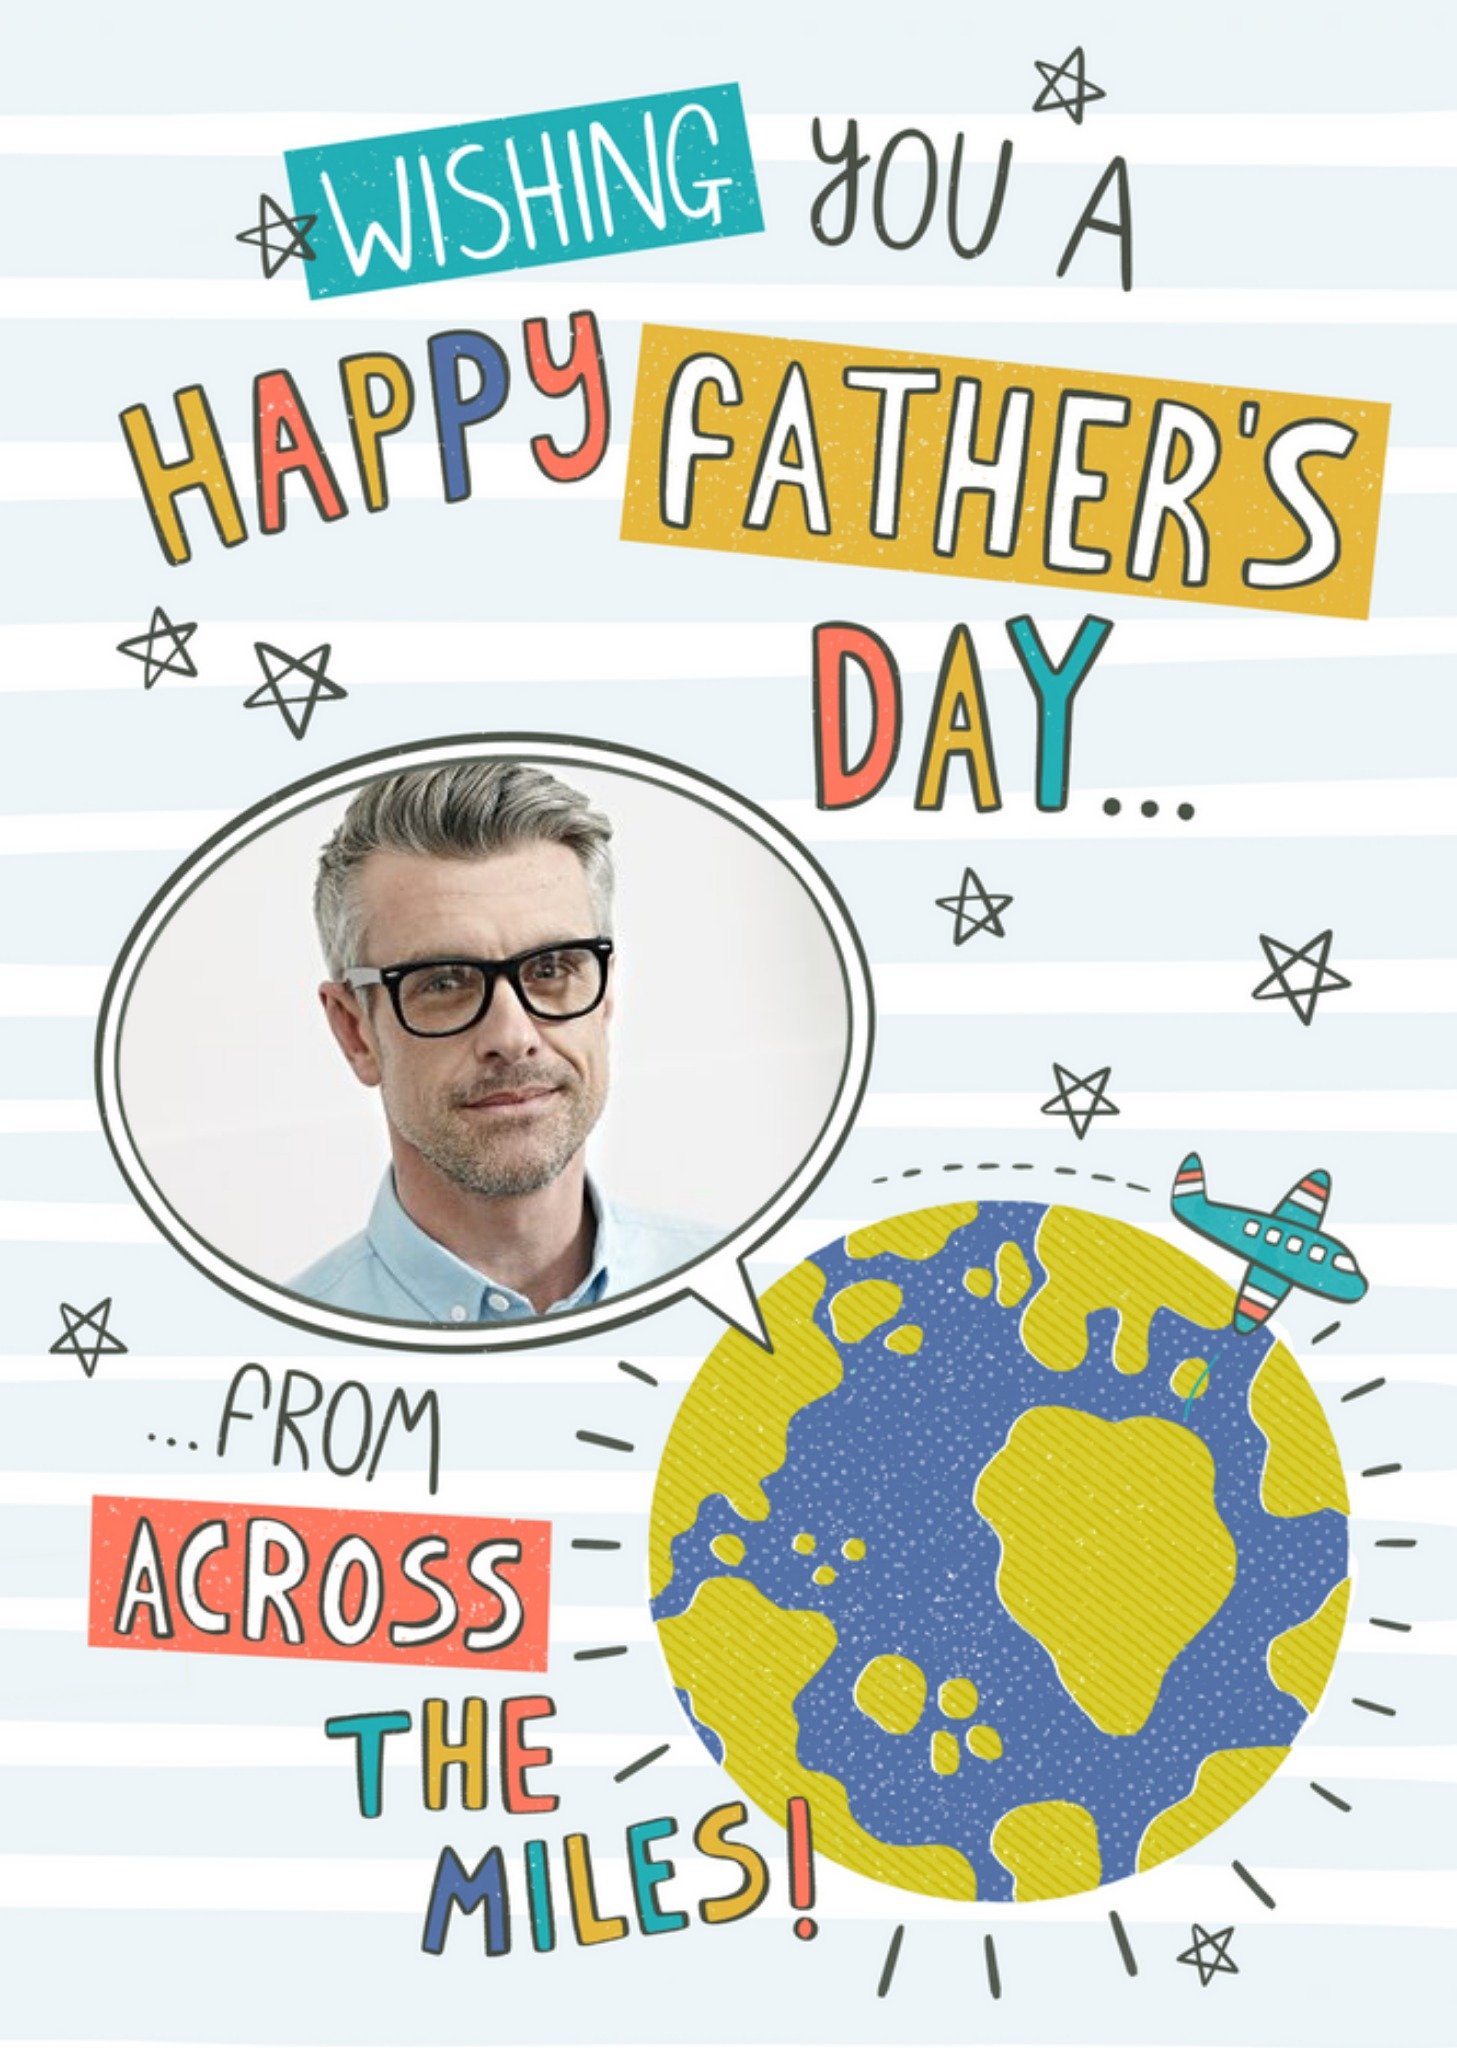 Moonpig Typographic Wishing You A Happy Fathers Day From Across The Miles, Large Card